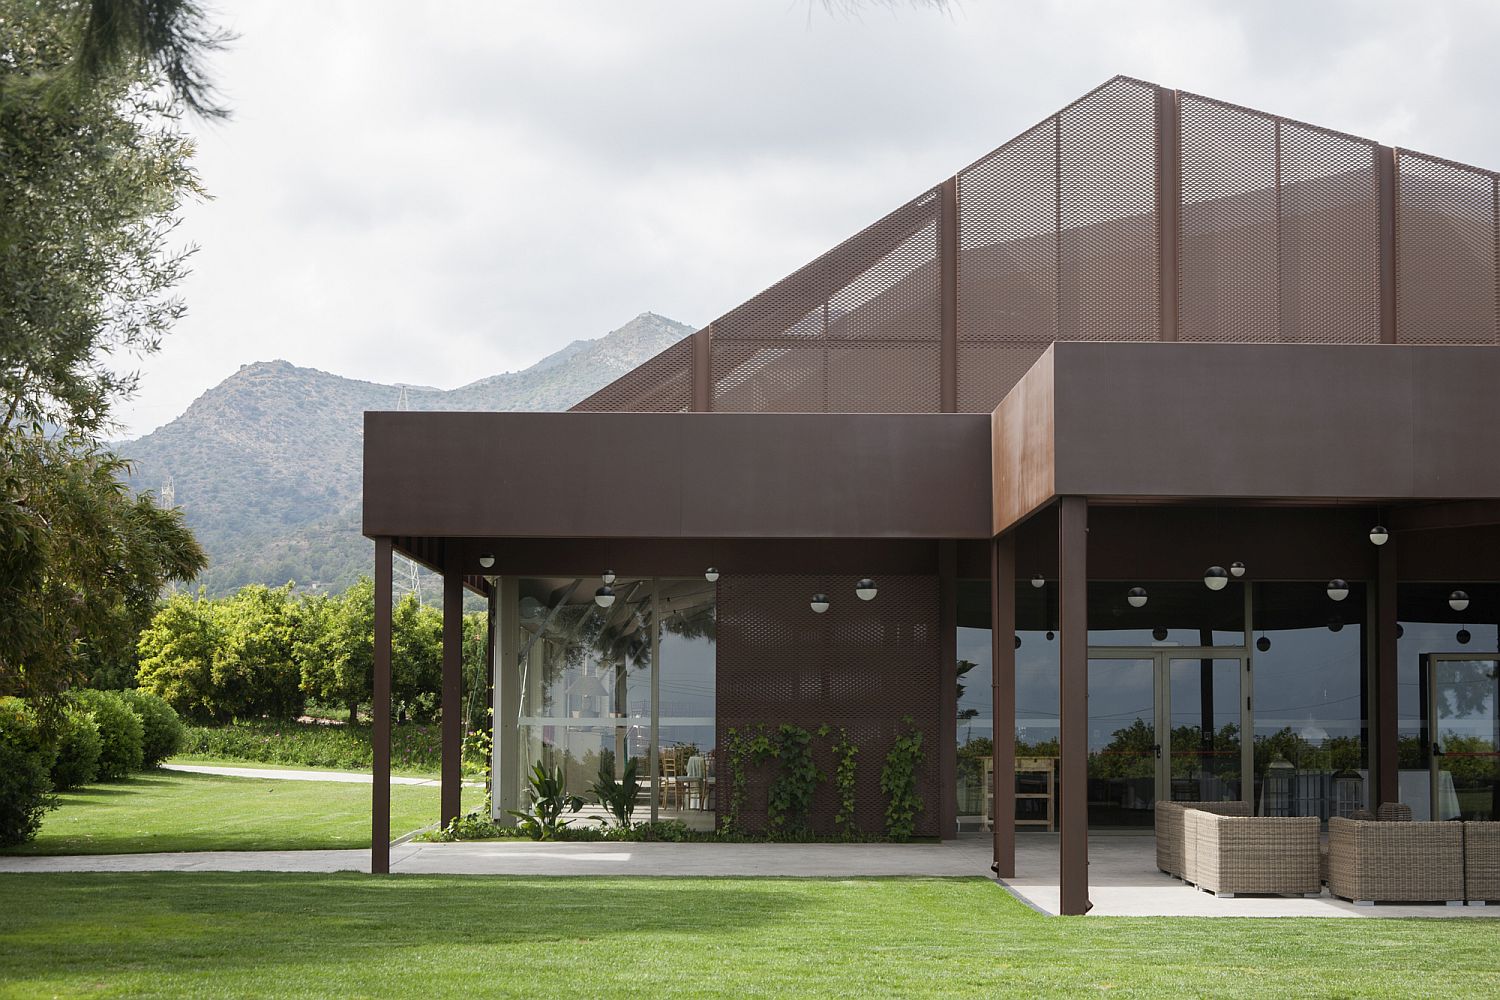 Corten steel structure creates fabulous outdoor spaces protected from the sun